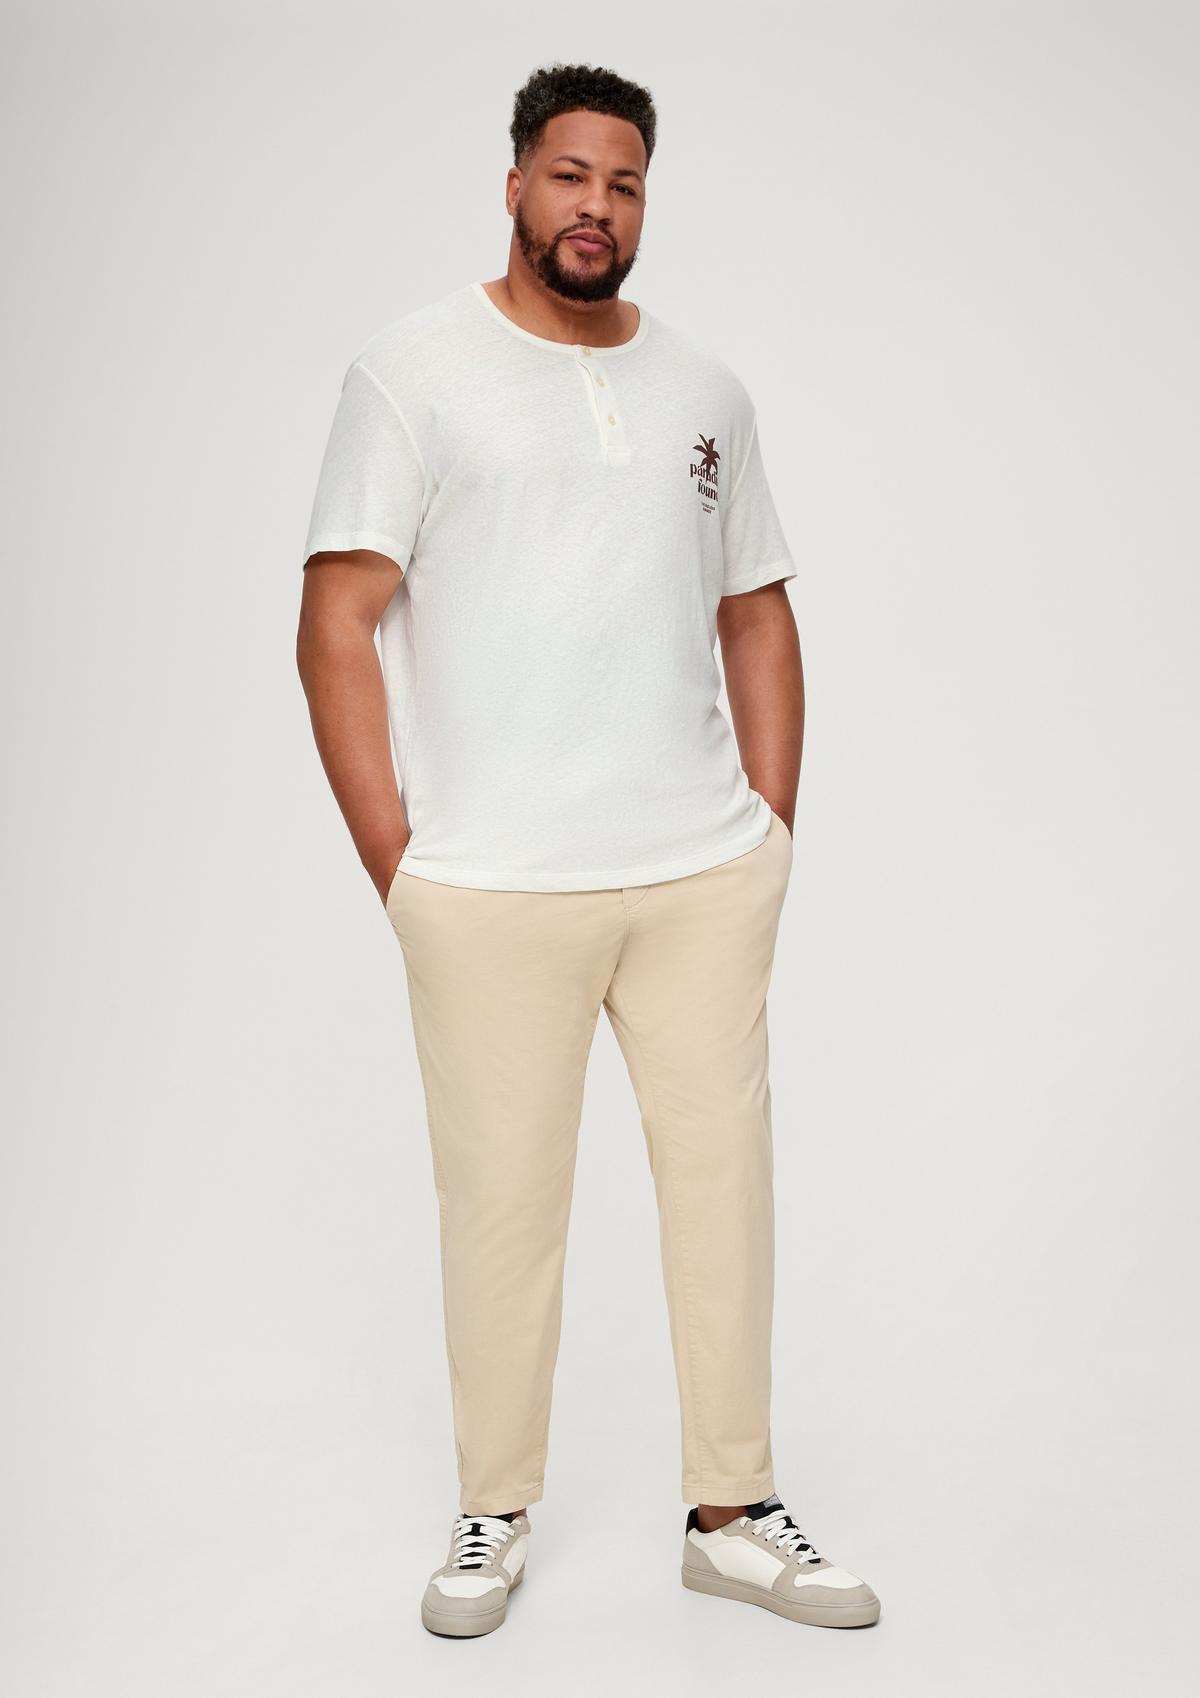 s.Oliver T-shirt made of cotton and hemp